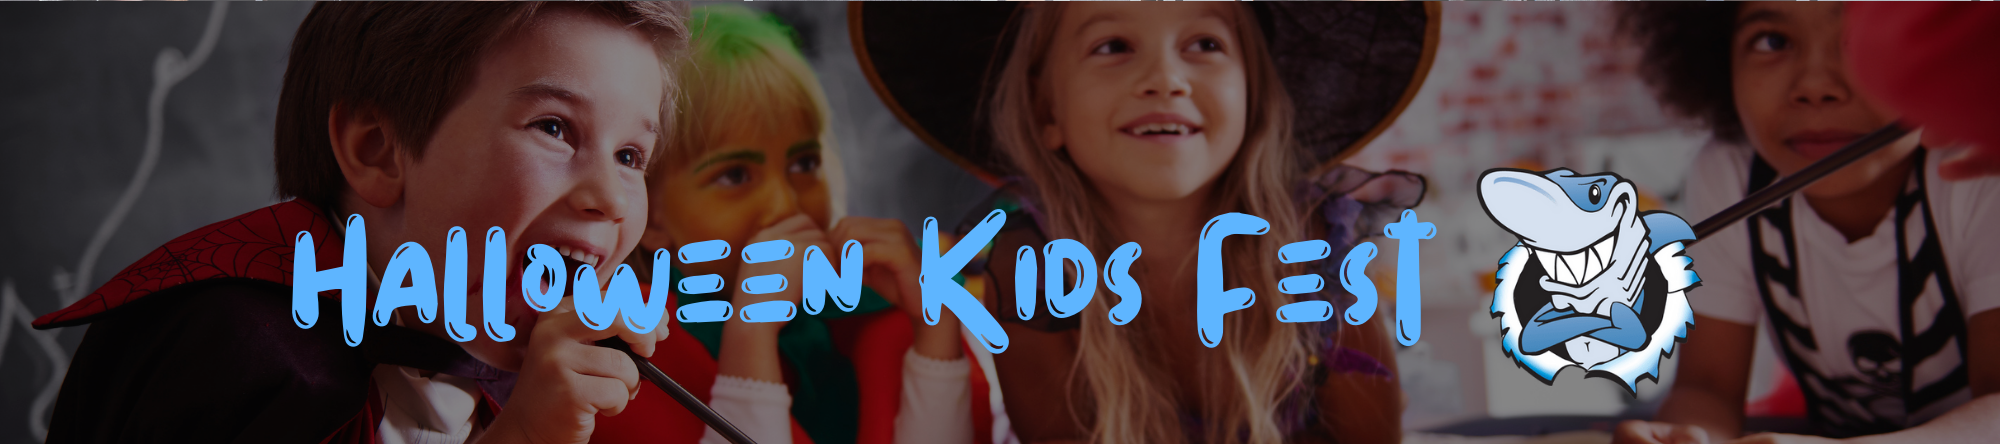 Kids Fest at the Denver Aquarium with painting pumpkins, costumes, candy, train rides, and more! 